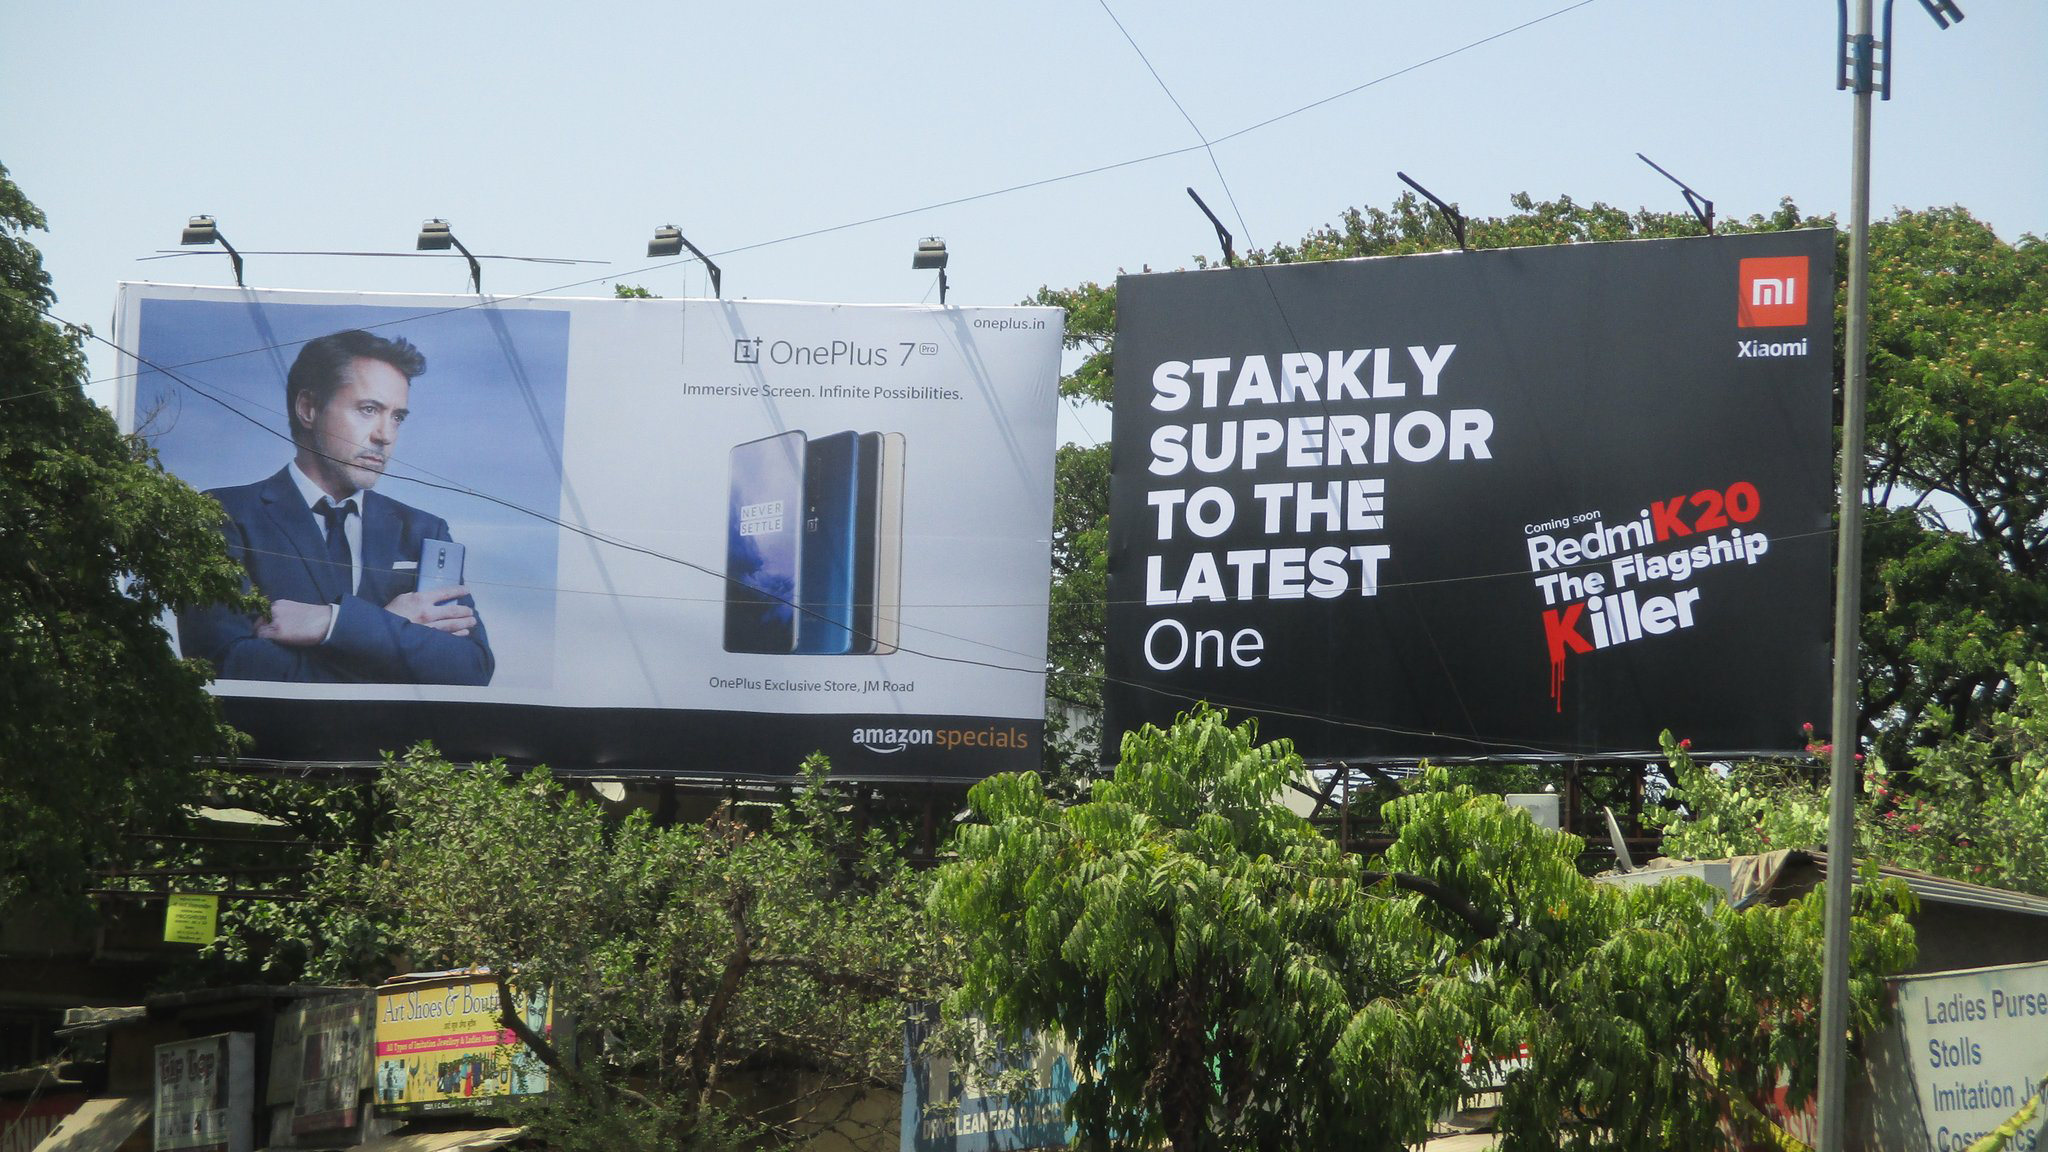 An image of two competing billboards for the smartphone companies Redmi and OnePlus.